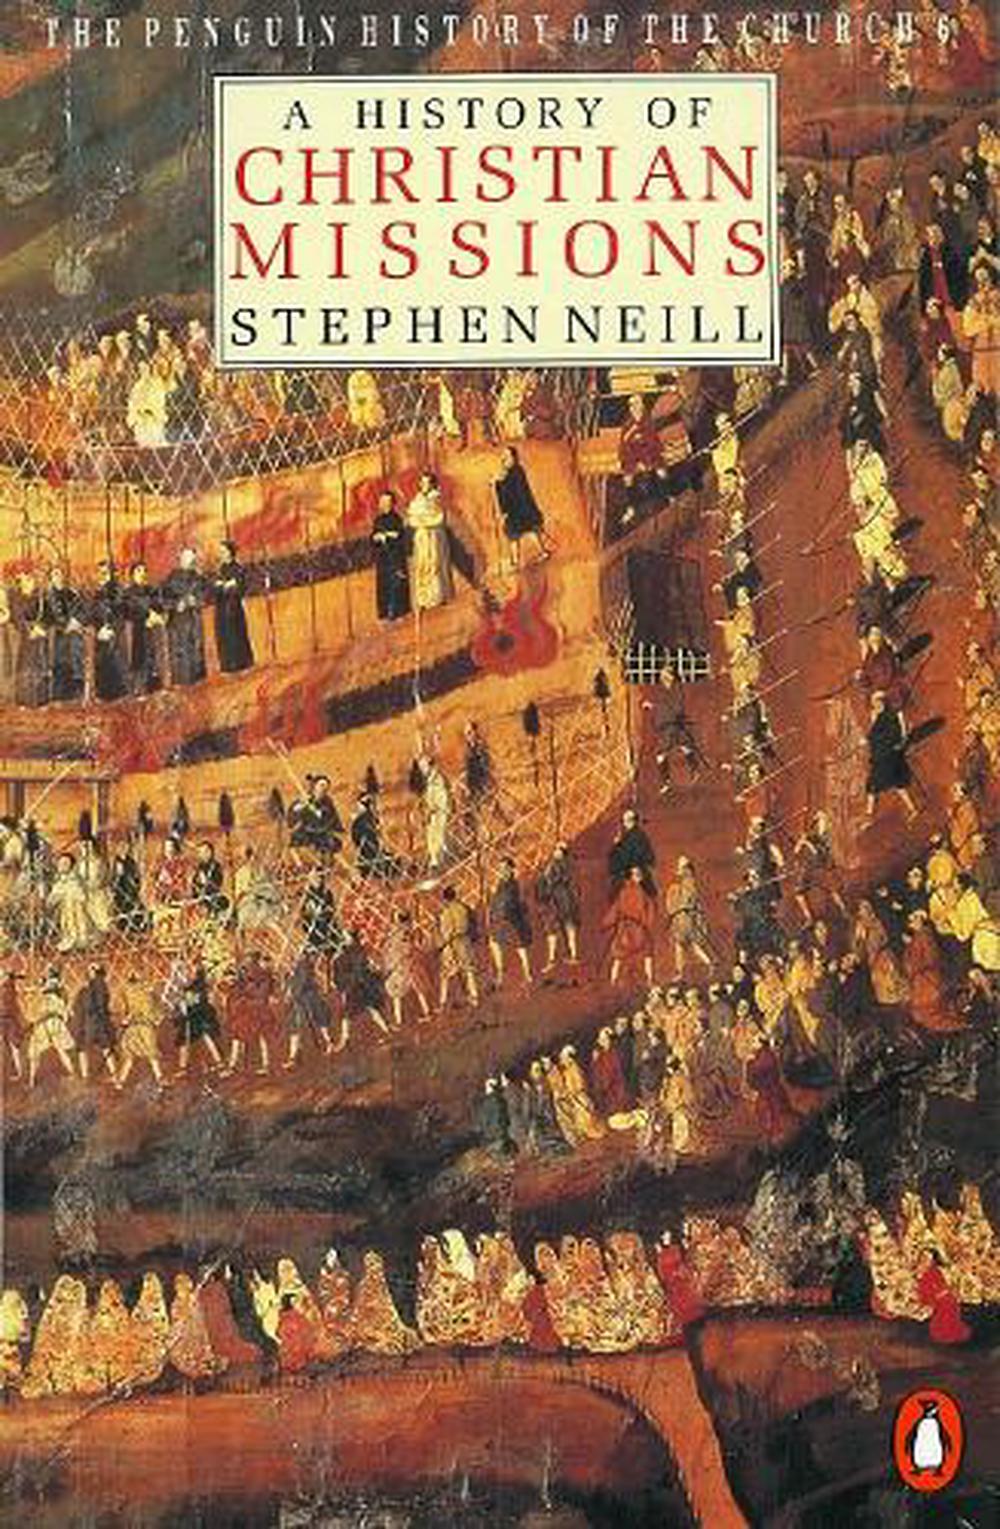 a history of christian missions by stephen neill pdf